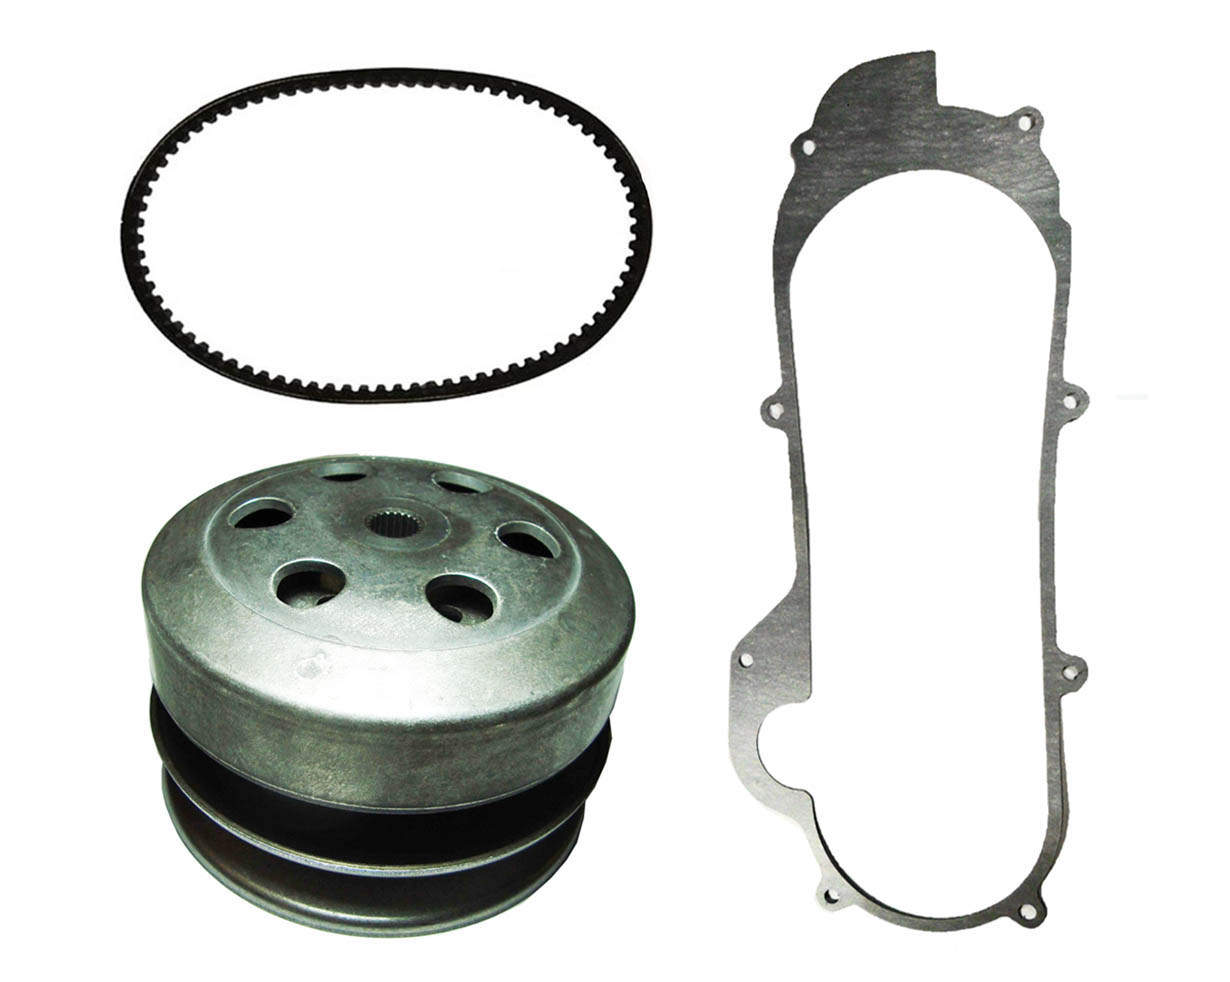 Rear Clutch, Belt & Gasket GY6 50cc 49cc QMB139 Short Case 4 Stroke Scooters - Click Image to Close